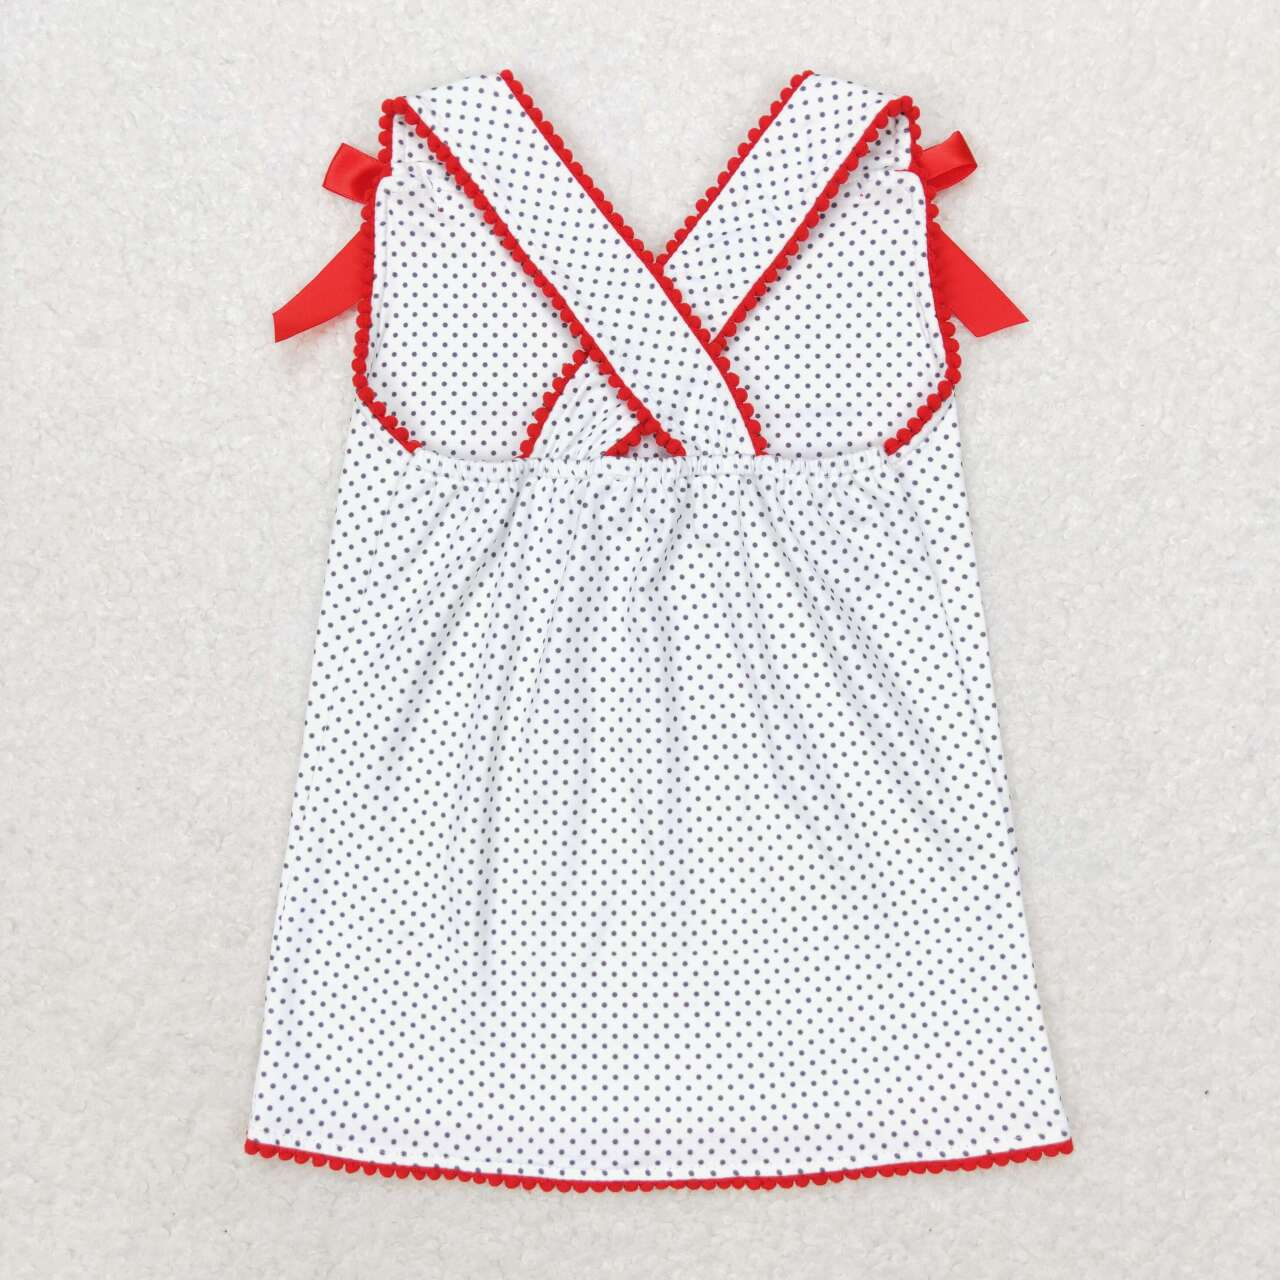 GBO0396 Flags Embroidery Top Red Shorts Baby Girls 4th of July Bummie Set